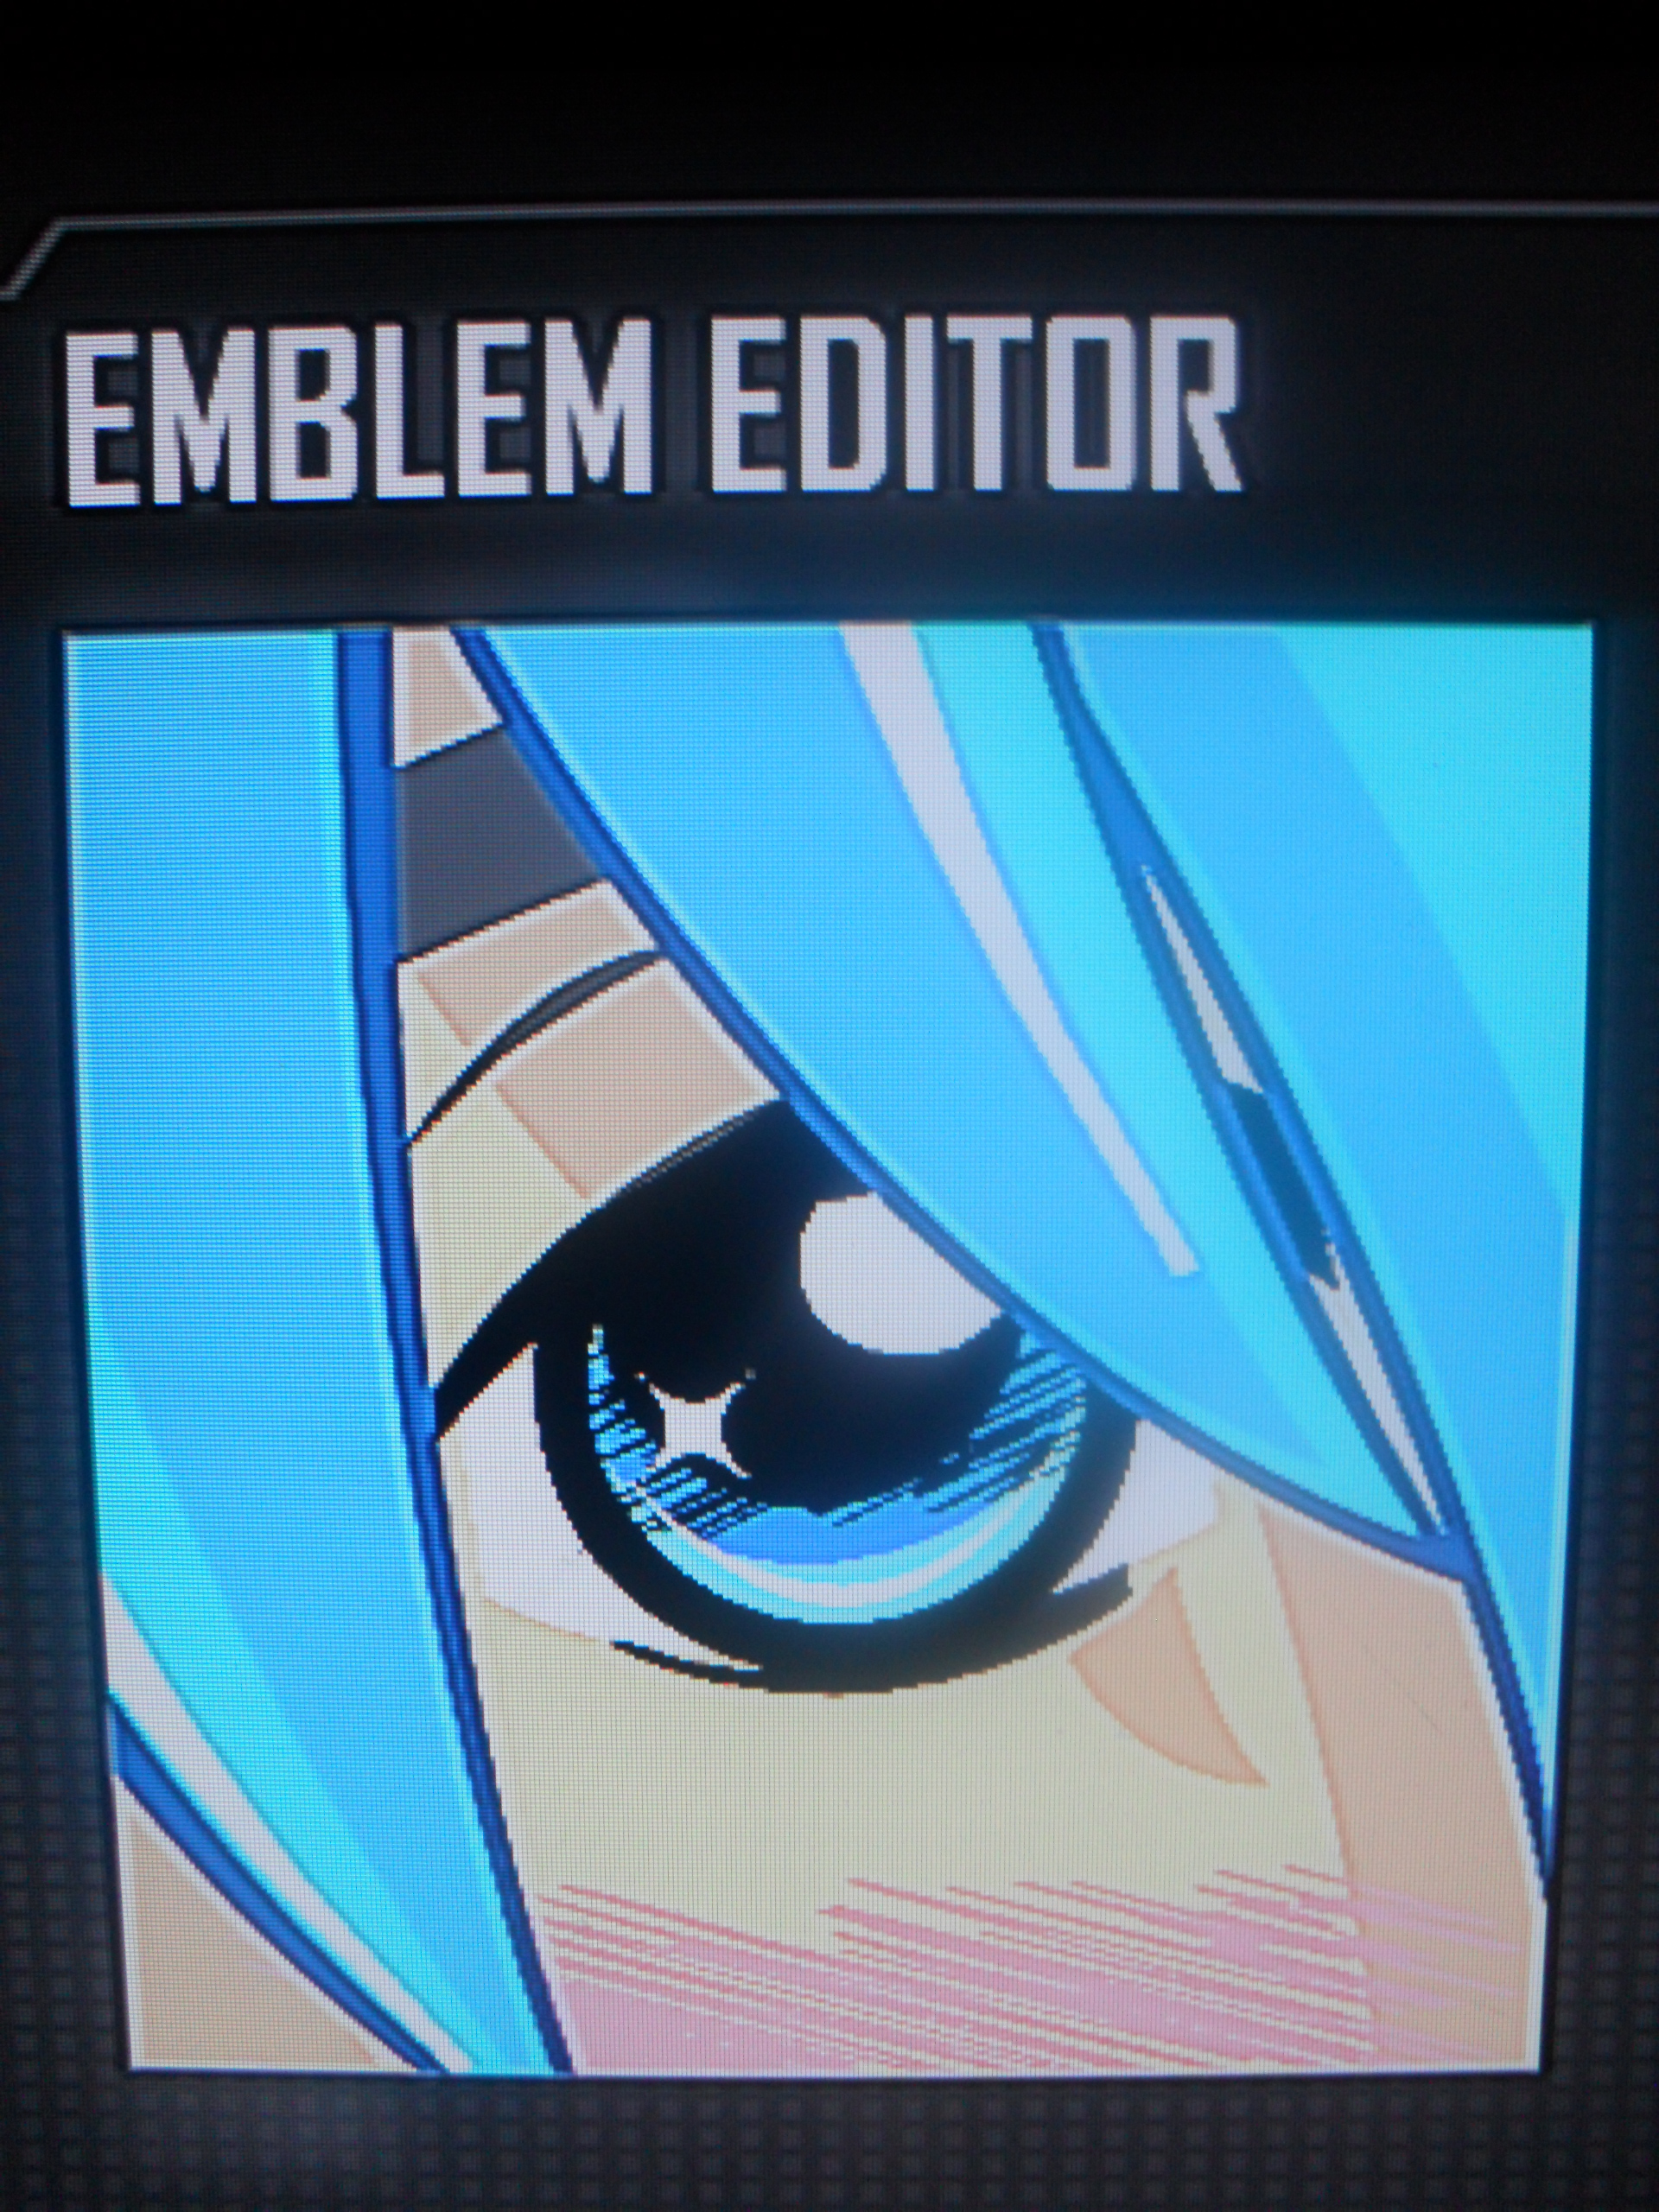 The Best Black Ops 2 emblem I have seen thus far - YouTube